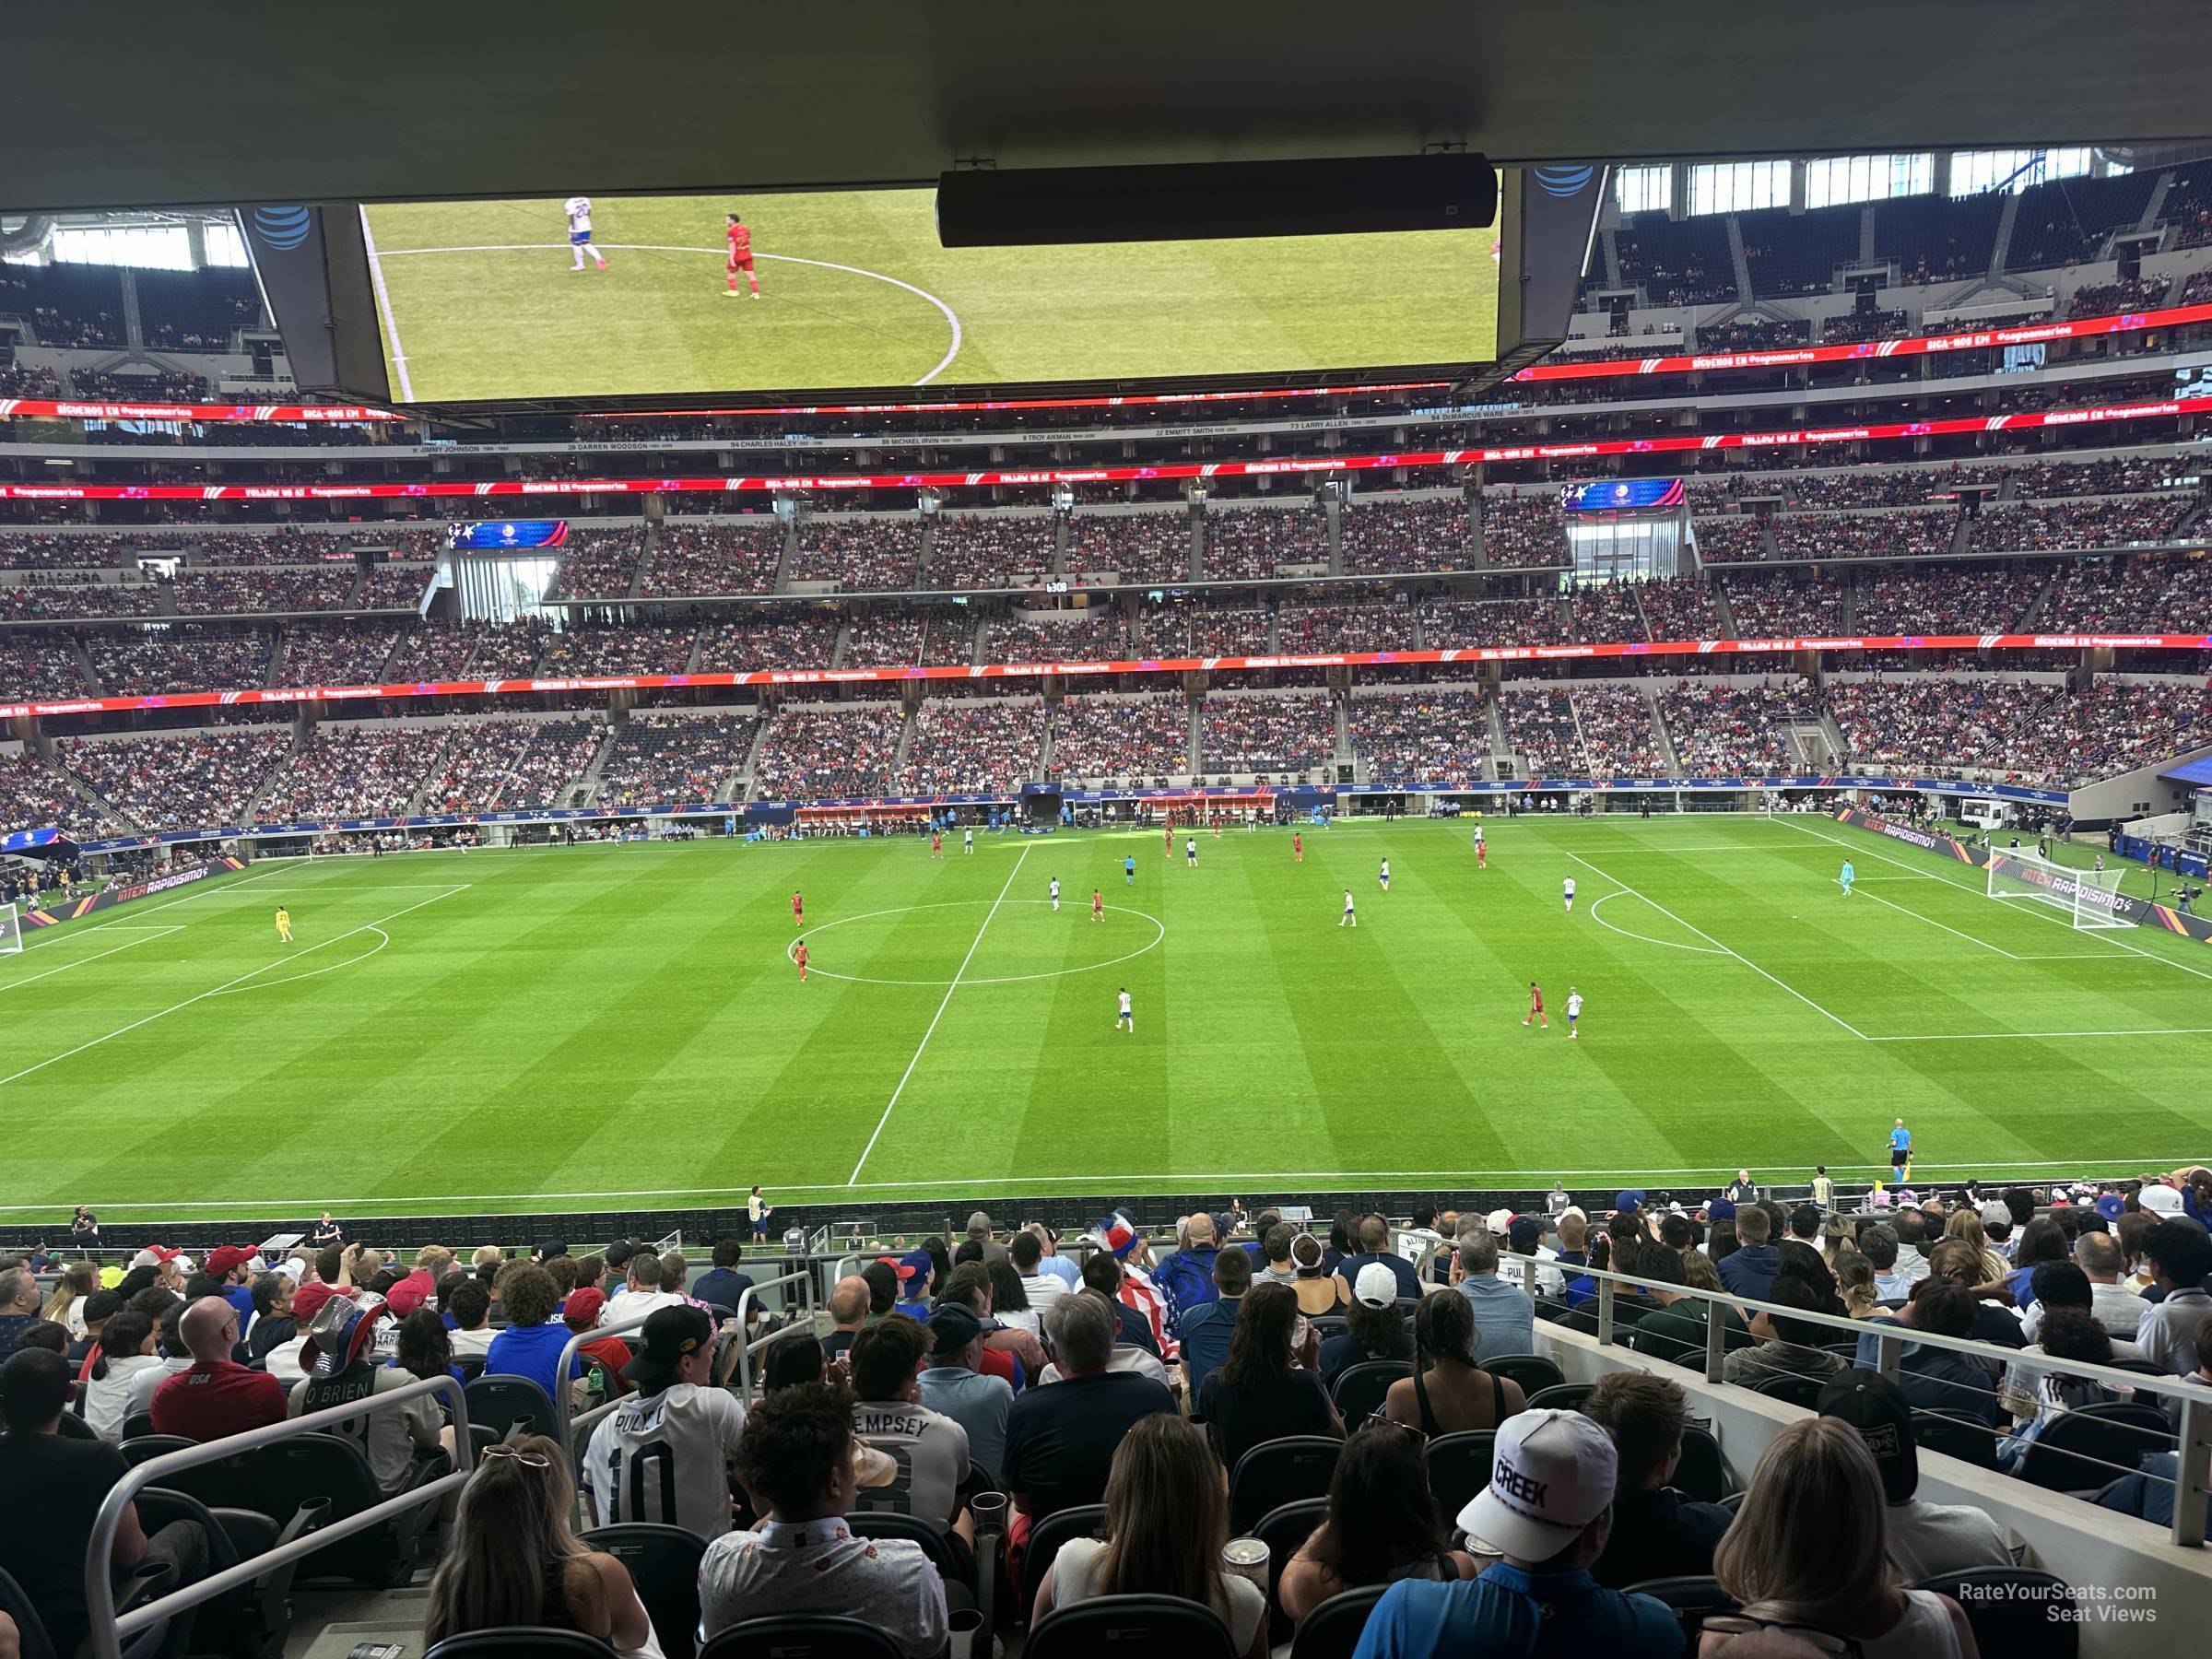 section c210, row 14 seat view  for soccer - at&t stadium (cowboys stadium)